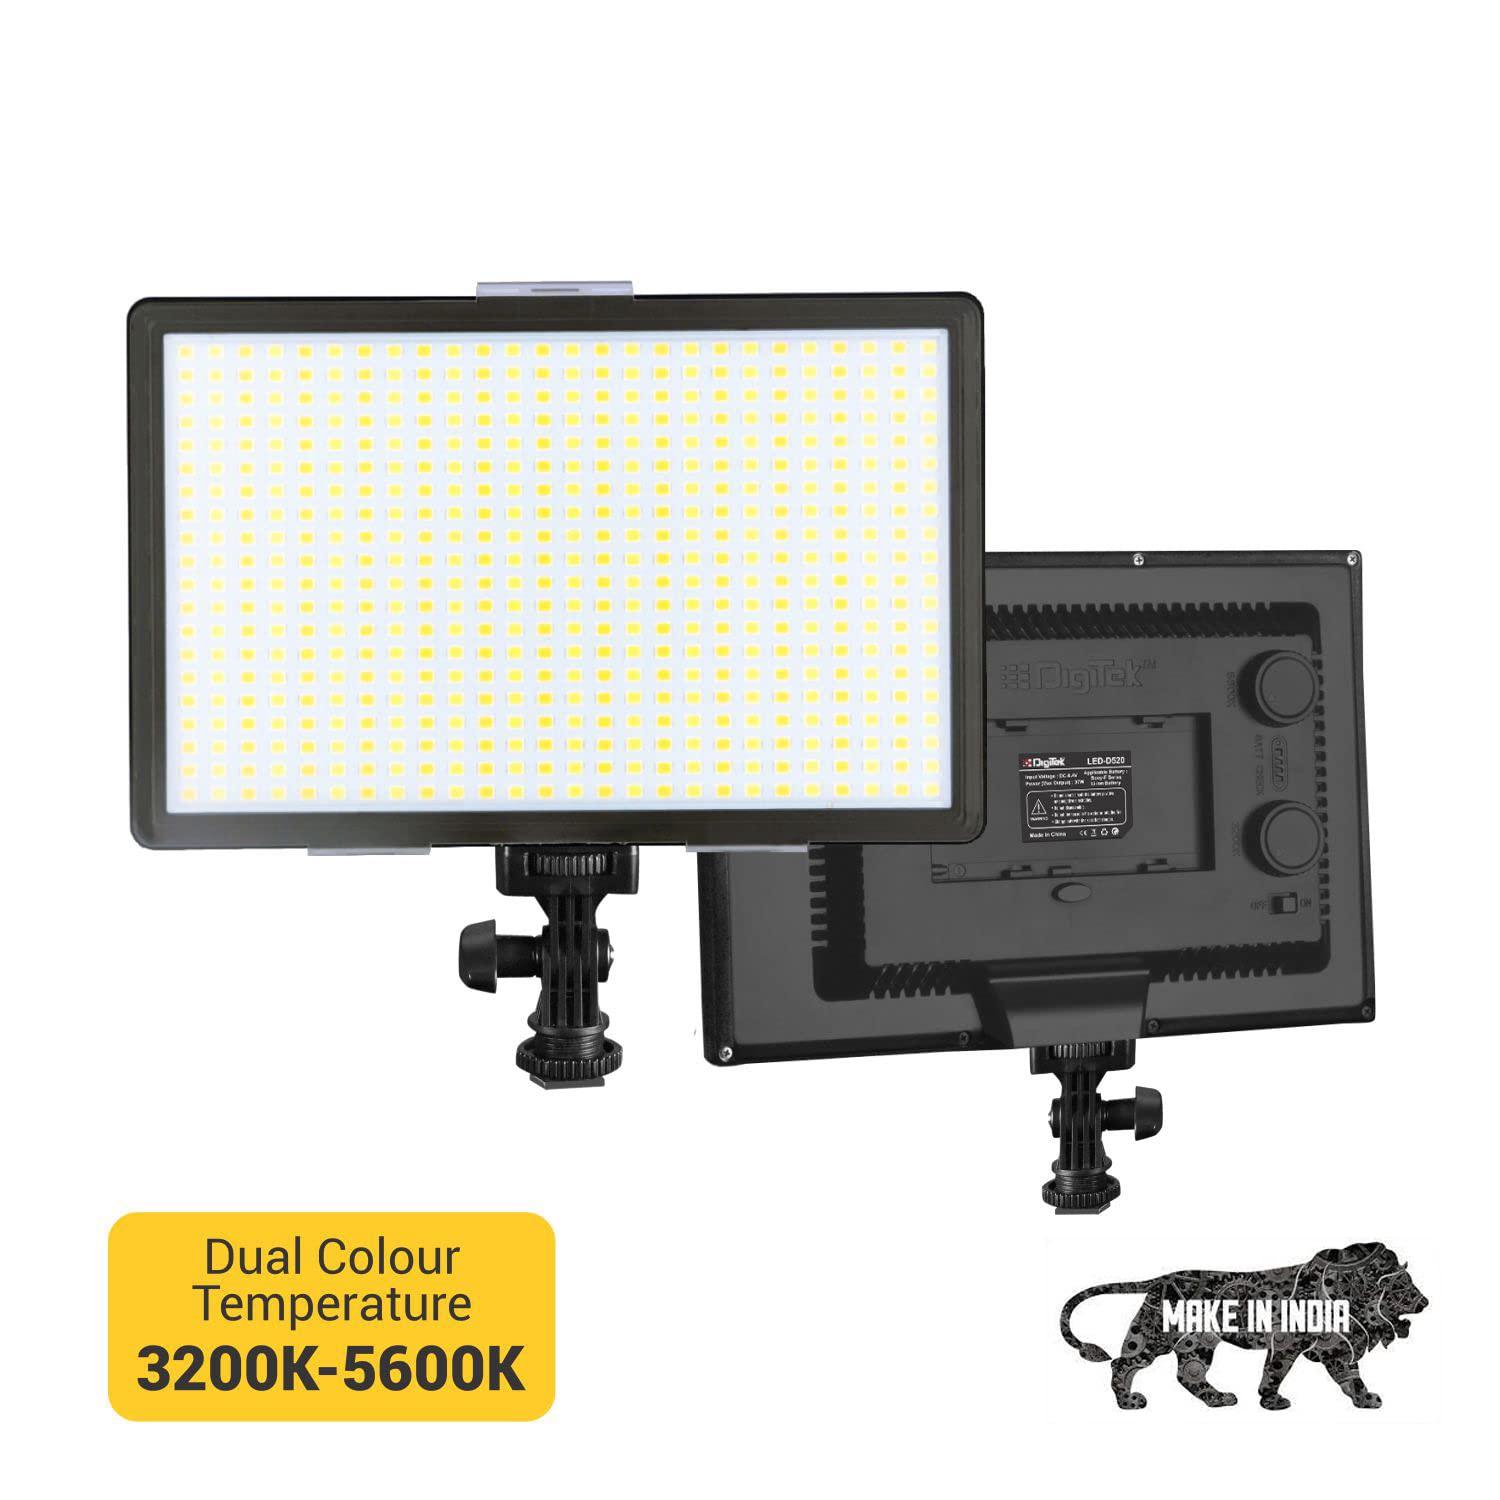 Digitek (LED-D520 WB) Professional LED 37W Video Light Compatible with Tripods, Monopods, Cameras, Table Stand & Camcorder, for YouTube Video, Product Photography, Makeup Shoot Proudly Make in India - Digitek